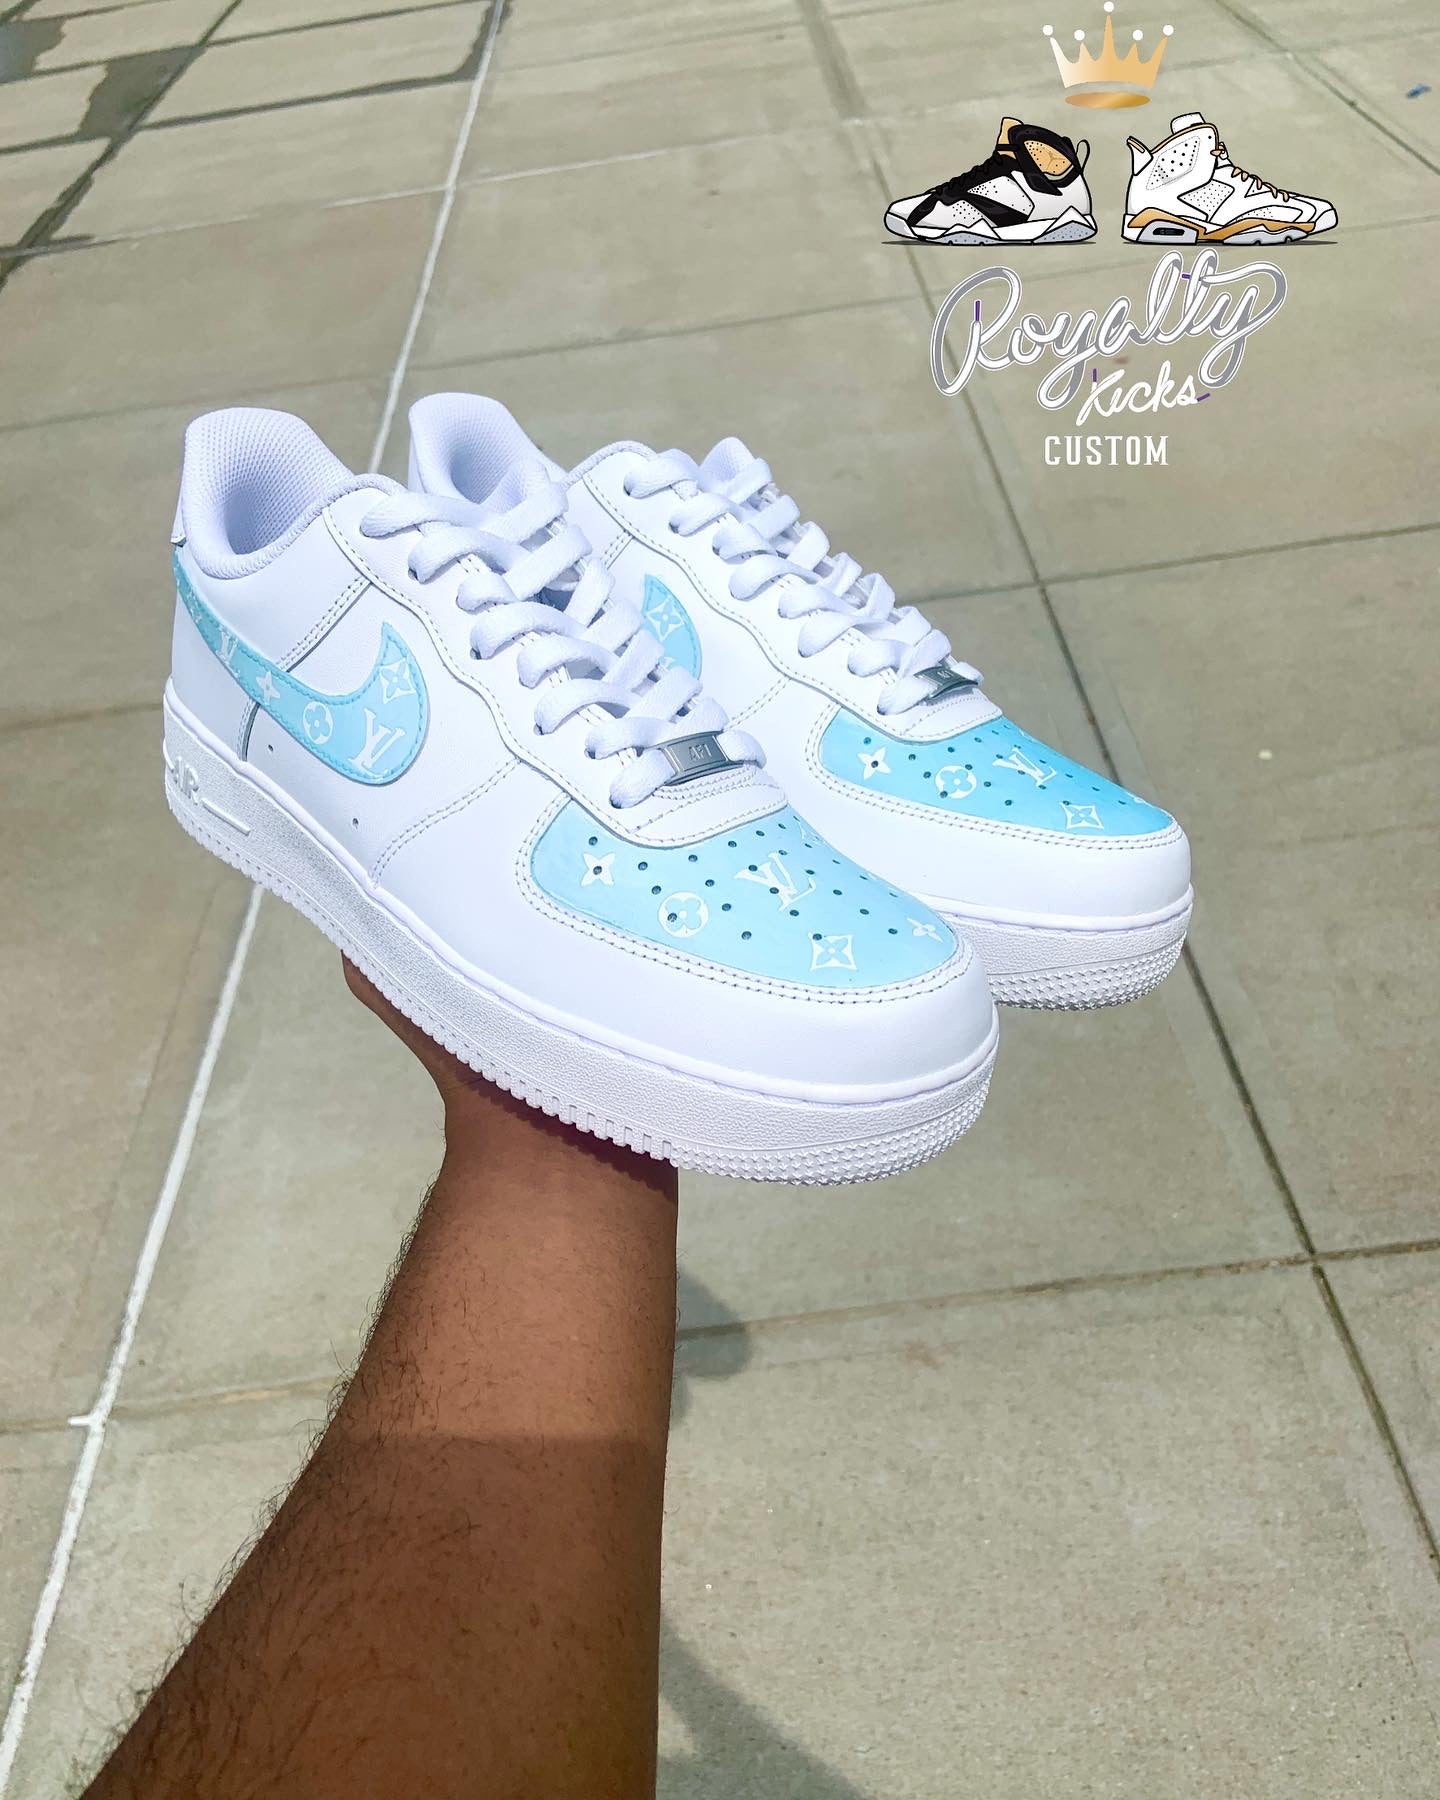 Top Customs - Blue LV Drip Air Force 1 Size 9 Available!